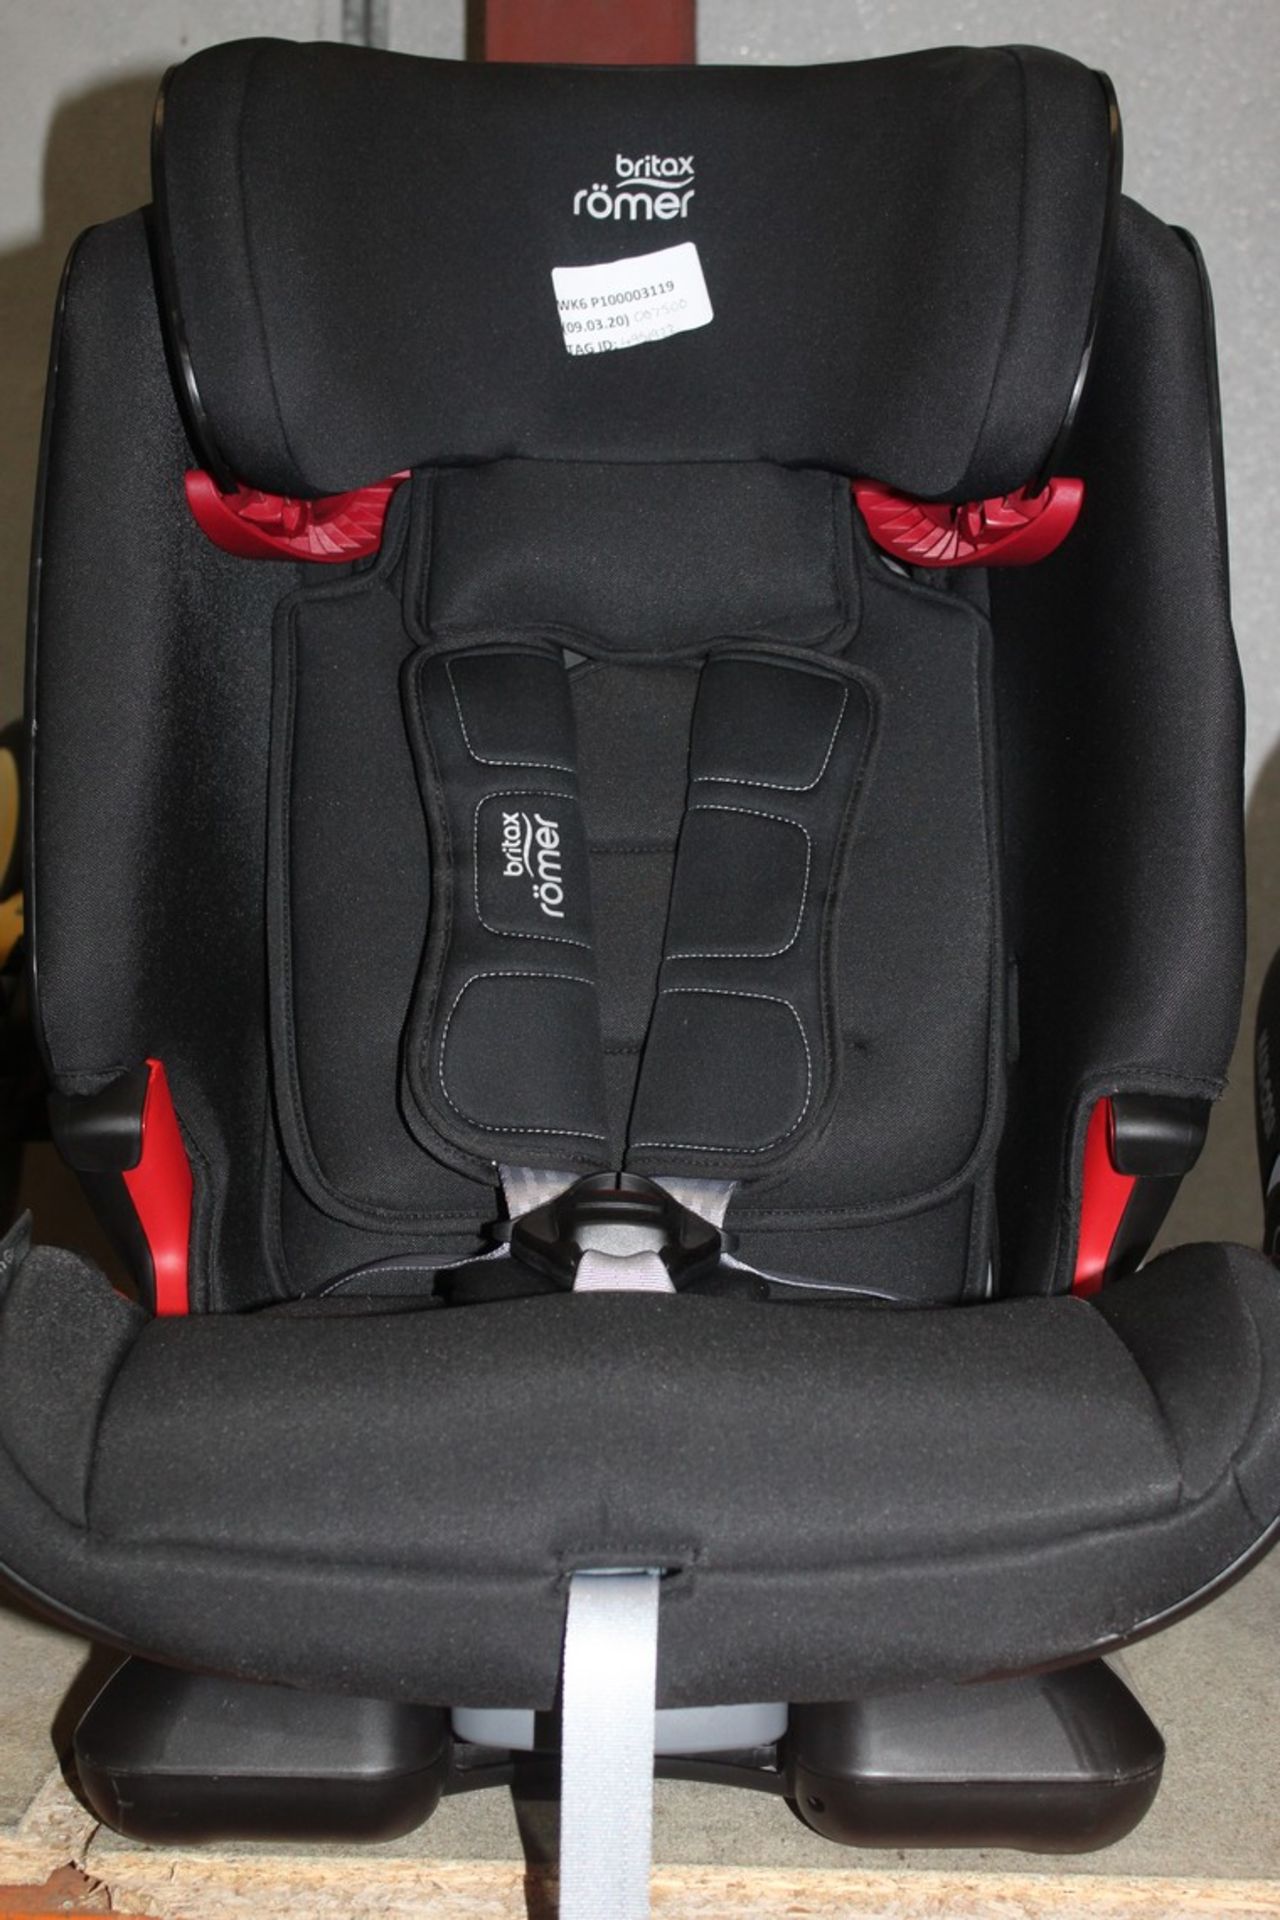 Brittax Roma Childrens Safety Seat Base RRP £75 495192522